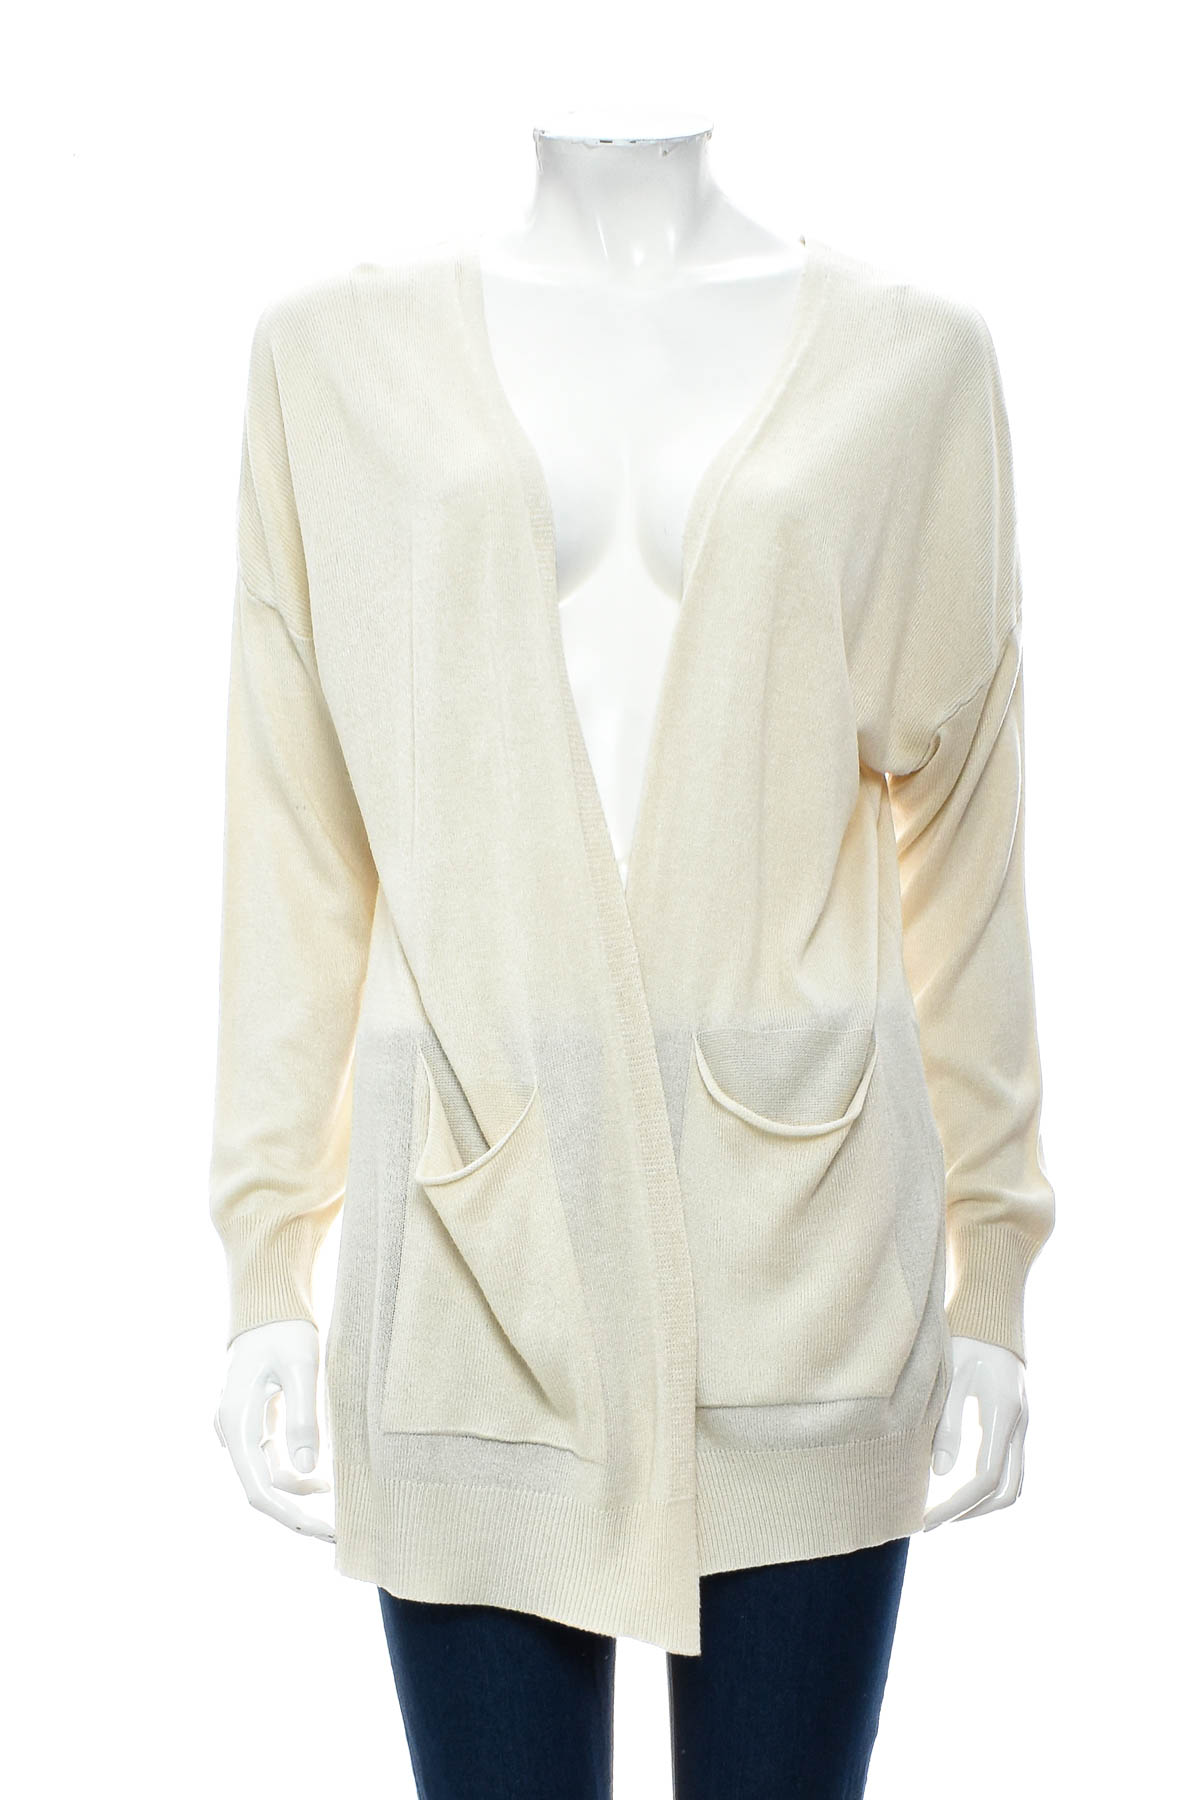 Women's cardigan - New Collection - 0